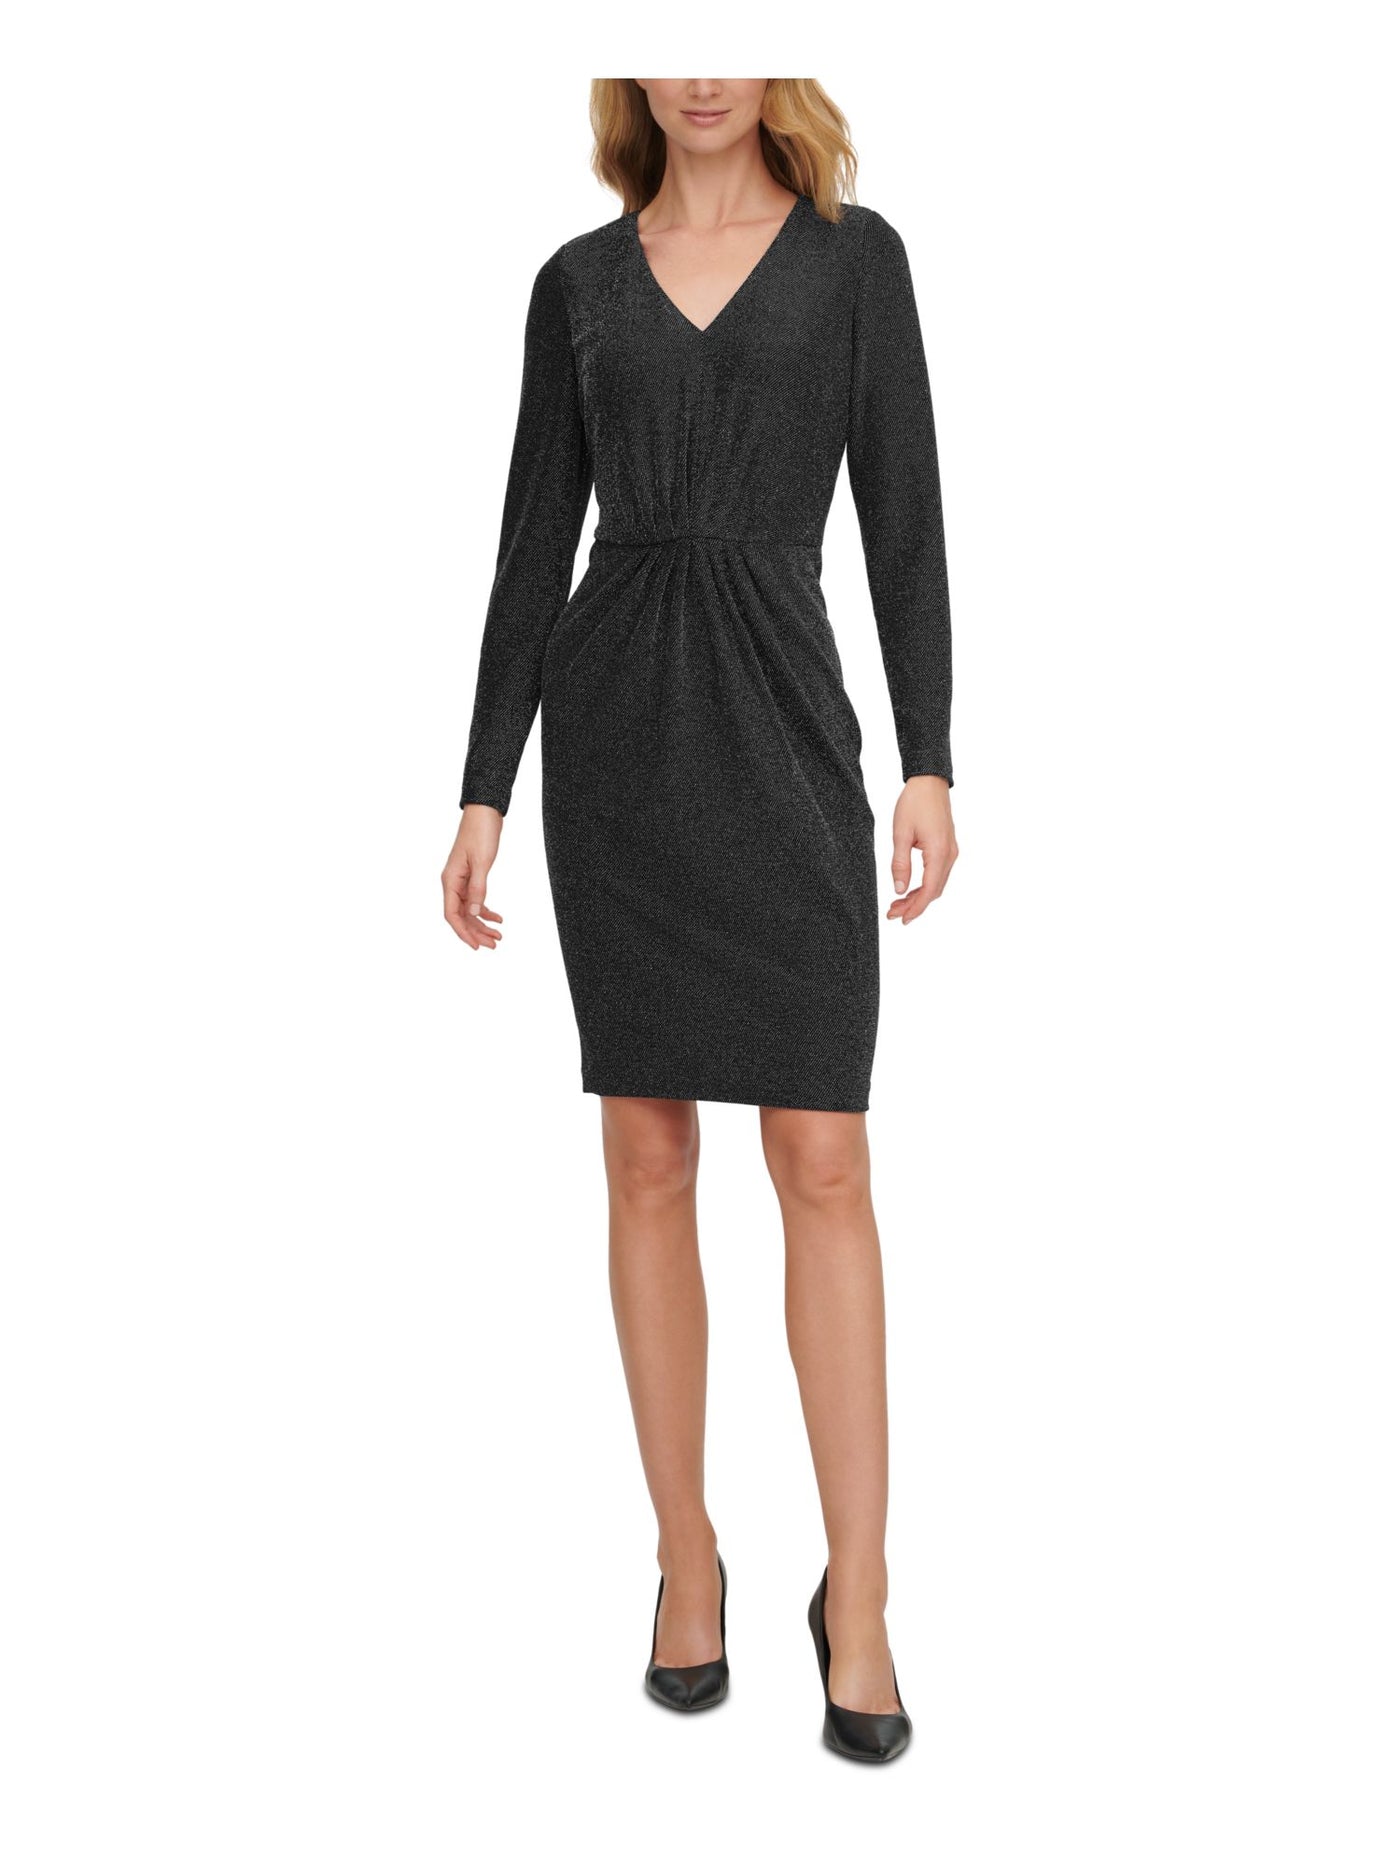 CALVIN KLEIN Womens Black Stretch Ruched Zippered Long Sleeve V Neck Above The Knee Party Sheath Dress 4